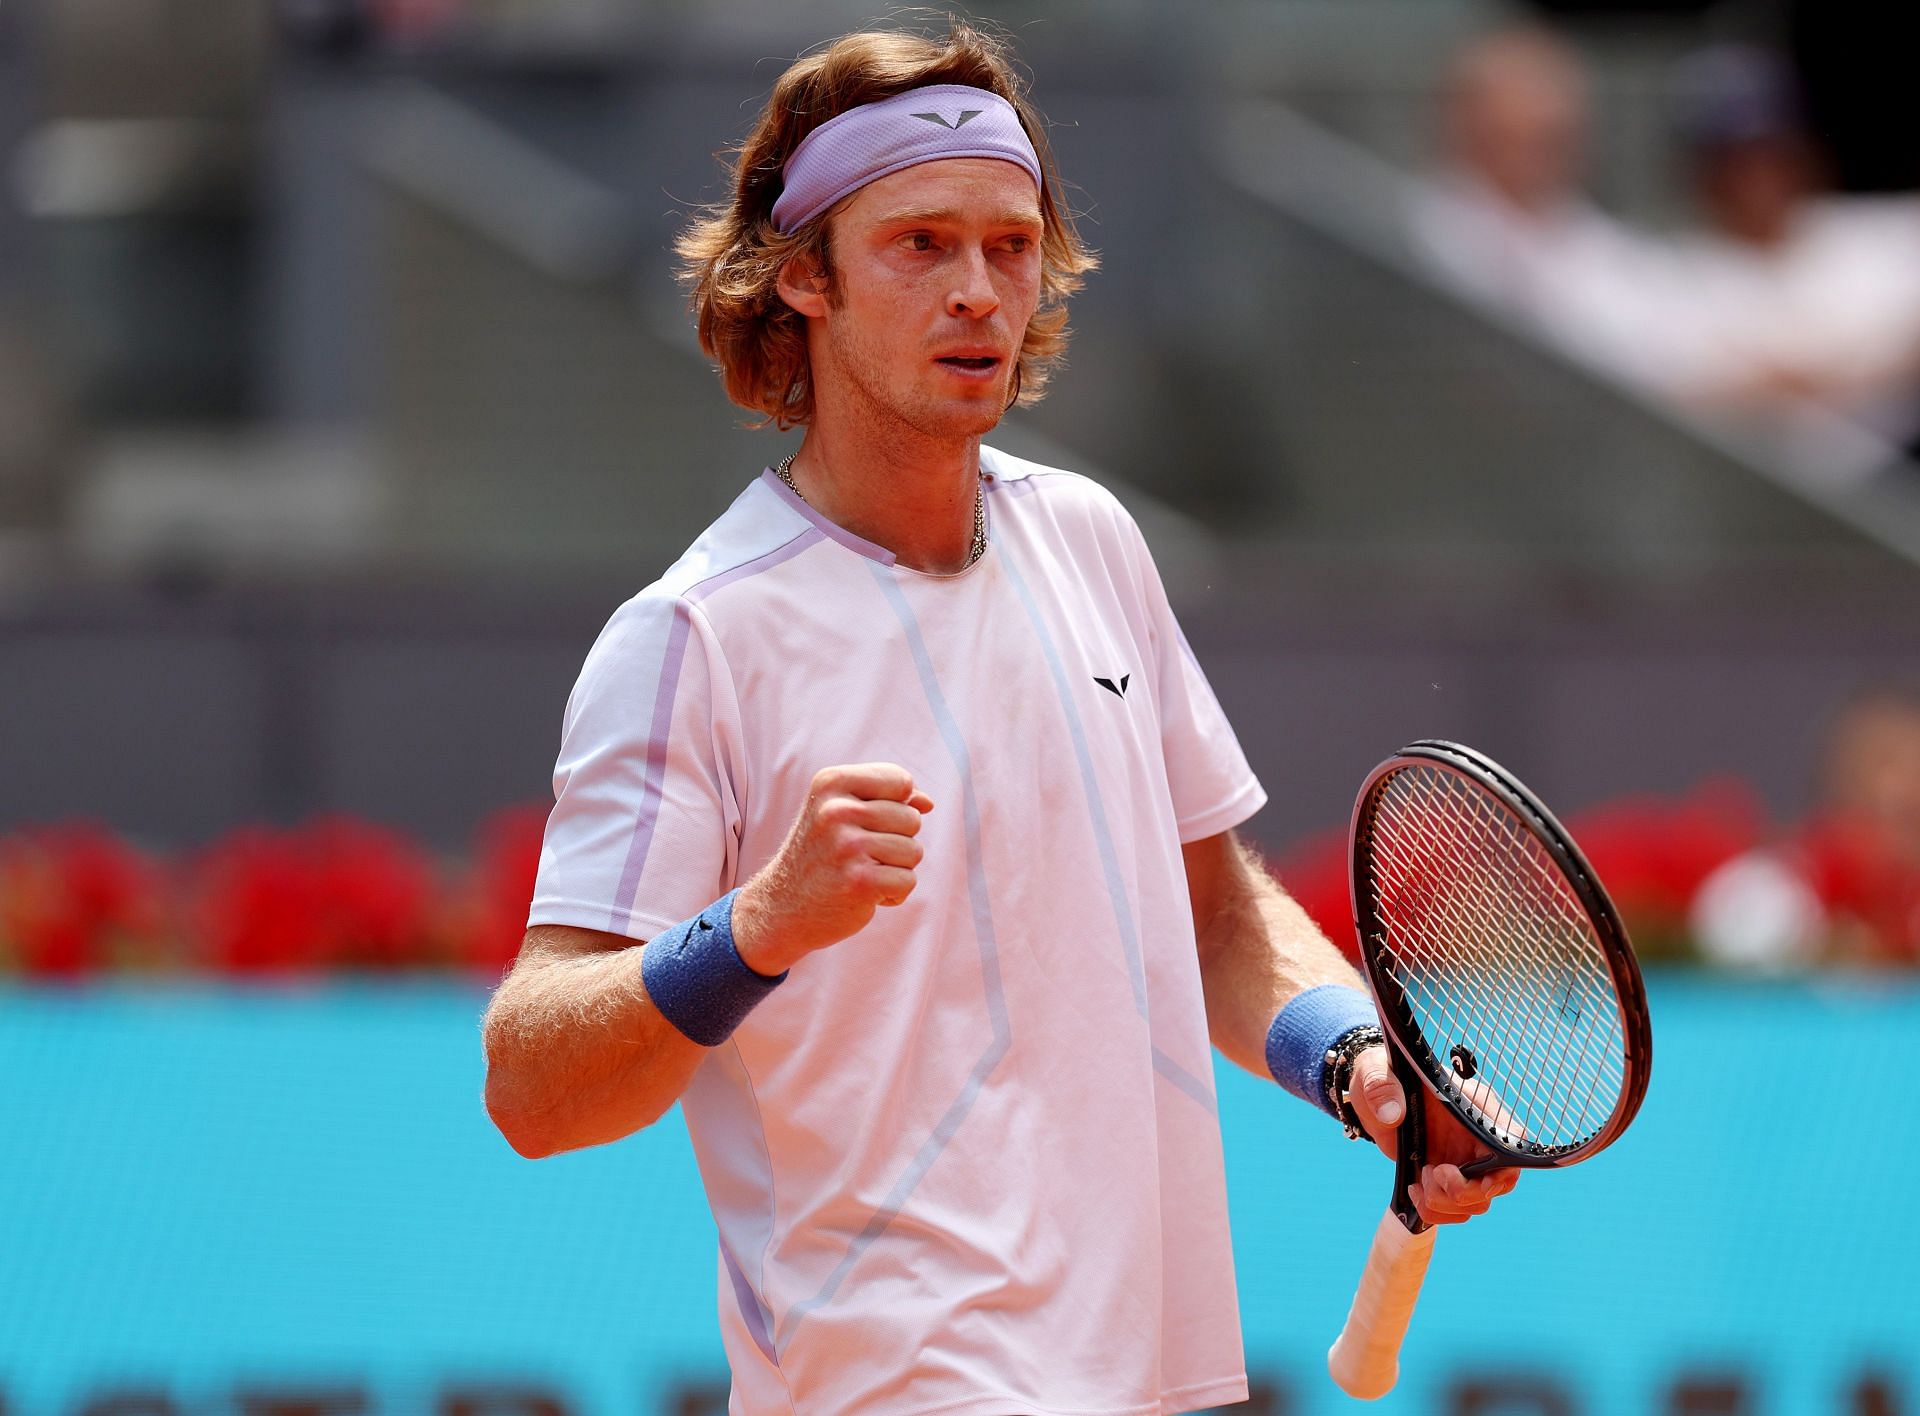 Rublev is into the third round.